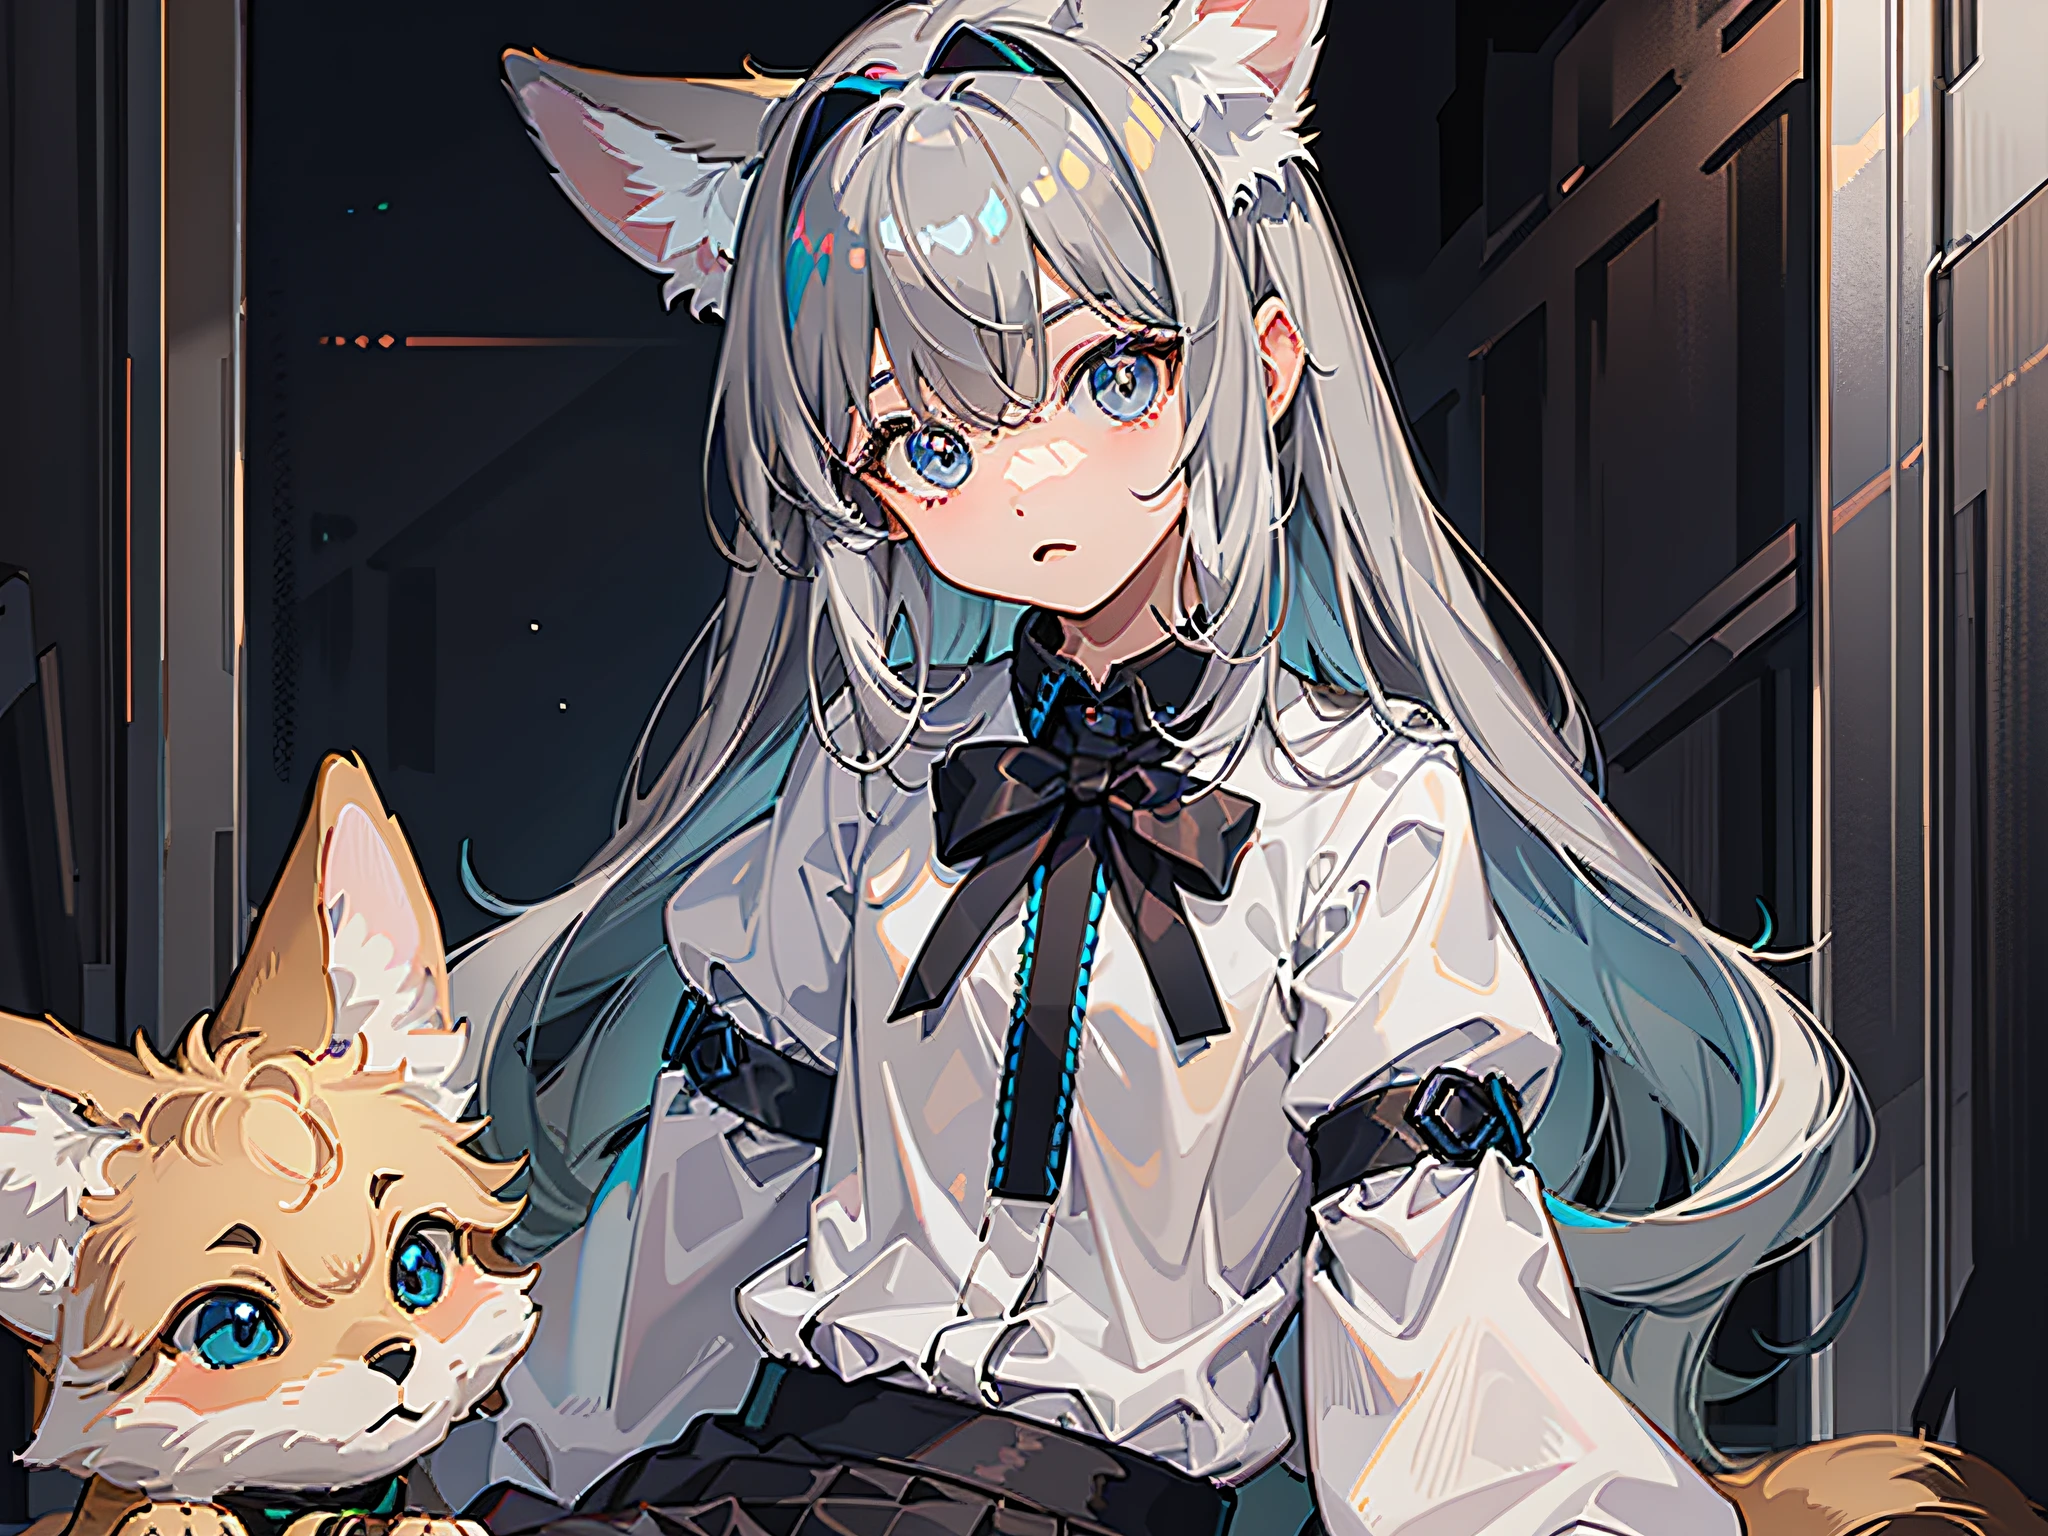 (HD quality, masterpiece level) (cute boy character) Shota, dark gray hair, blue eyes, cute fox ears and nine tails, (wearing a skirt), with bangs, covered ears and hair on the head, subtle youth, soft background.